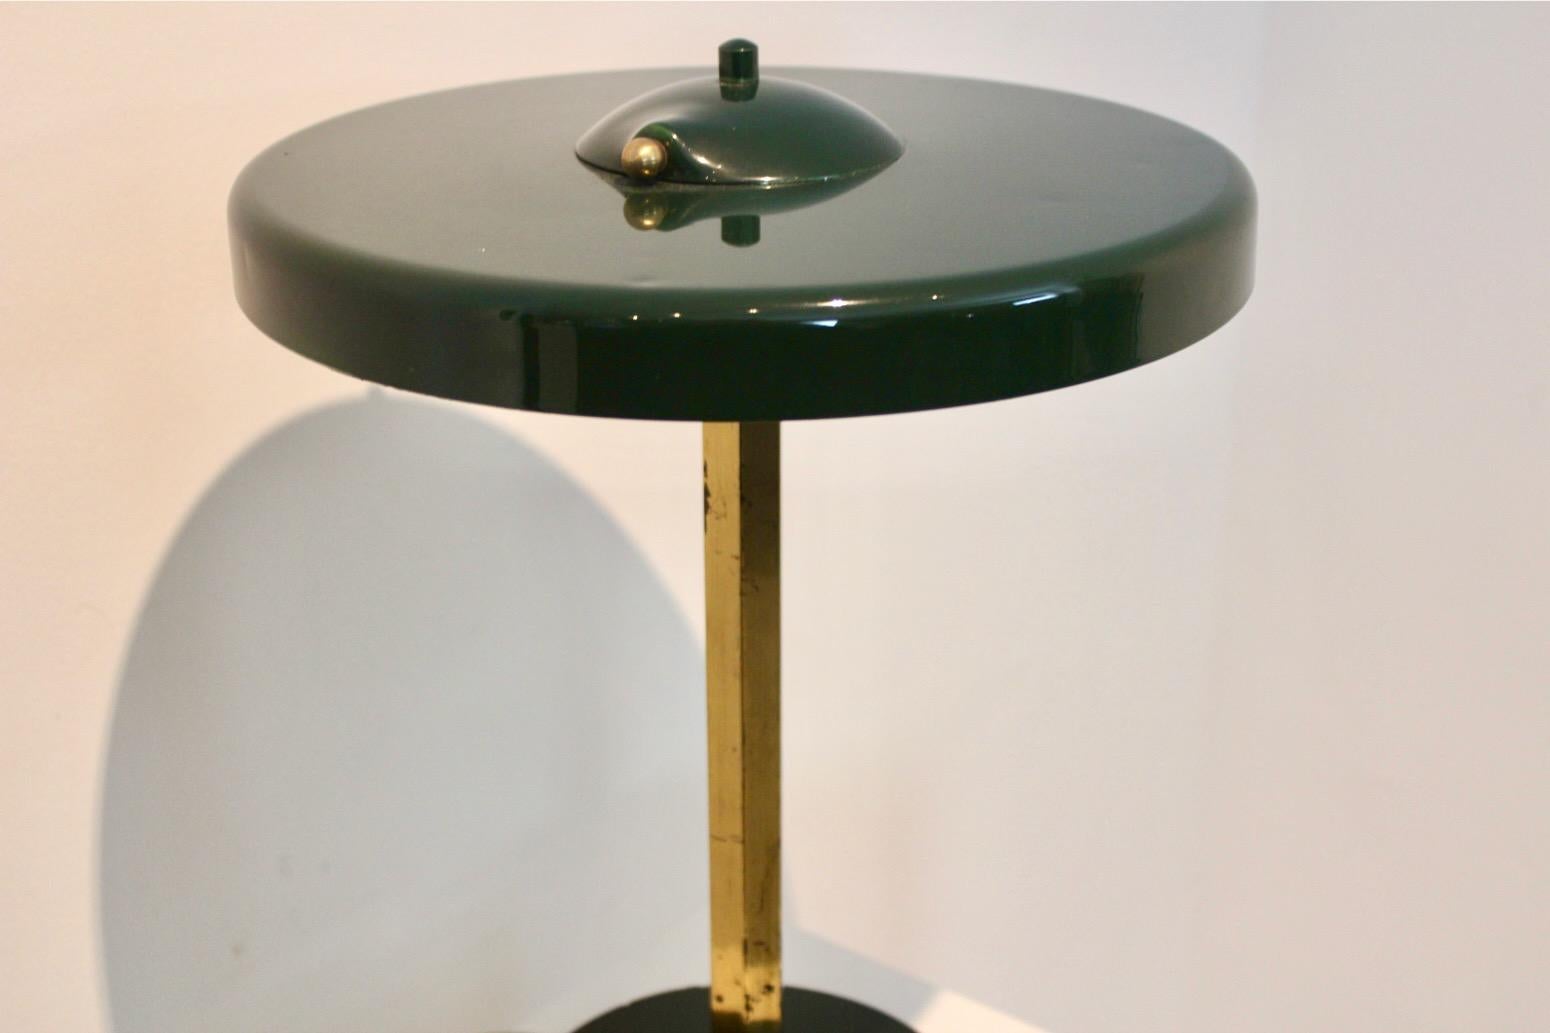 Rare collectable Table lamp found in France with origin 1970s. This sophisticated Mid-Century Table Lamp has a robust brass base on a subtle green steel foot in the same green color as the steel shade. The shade comes with a beautiful asymmetric